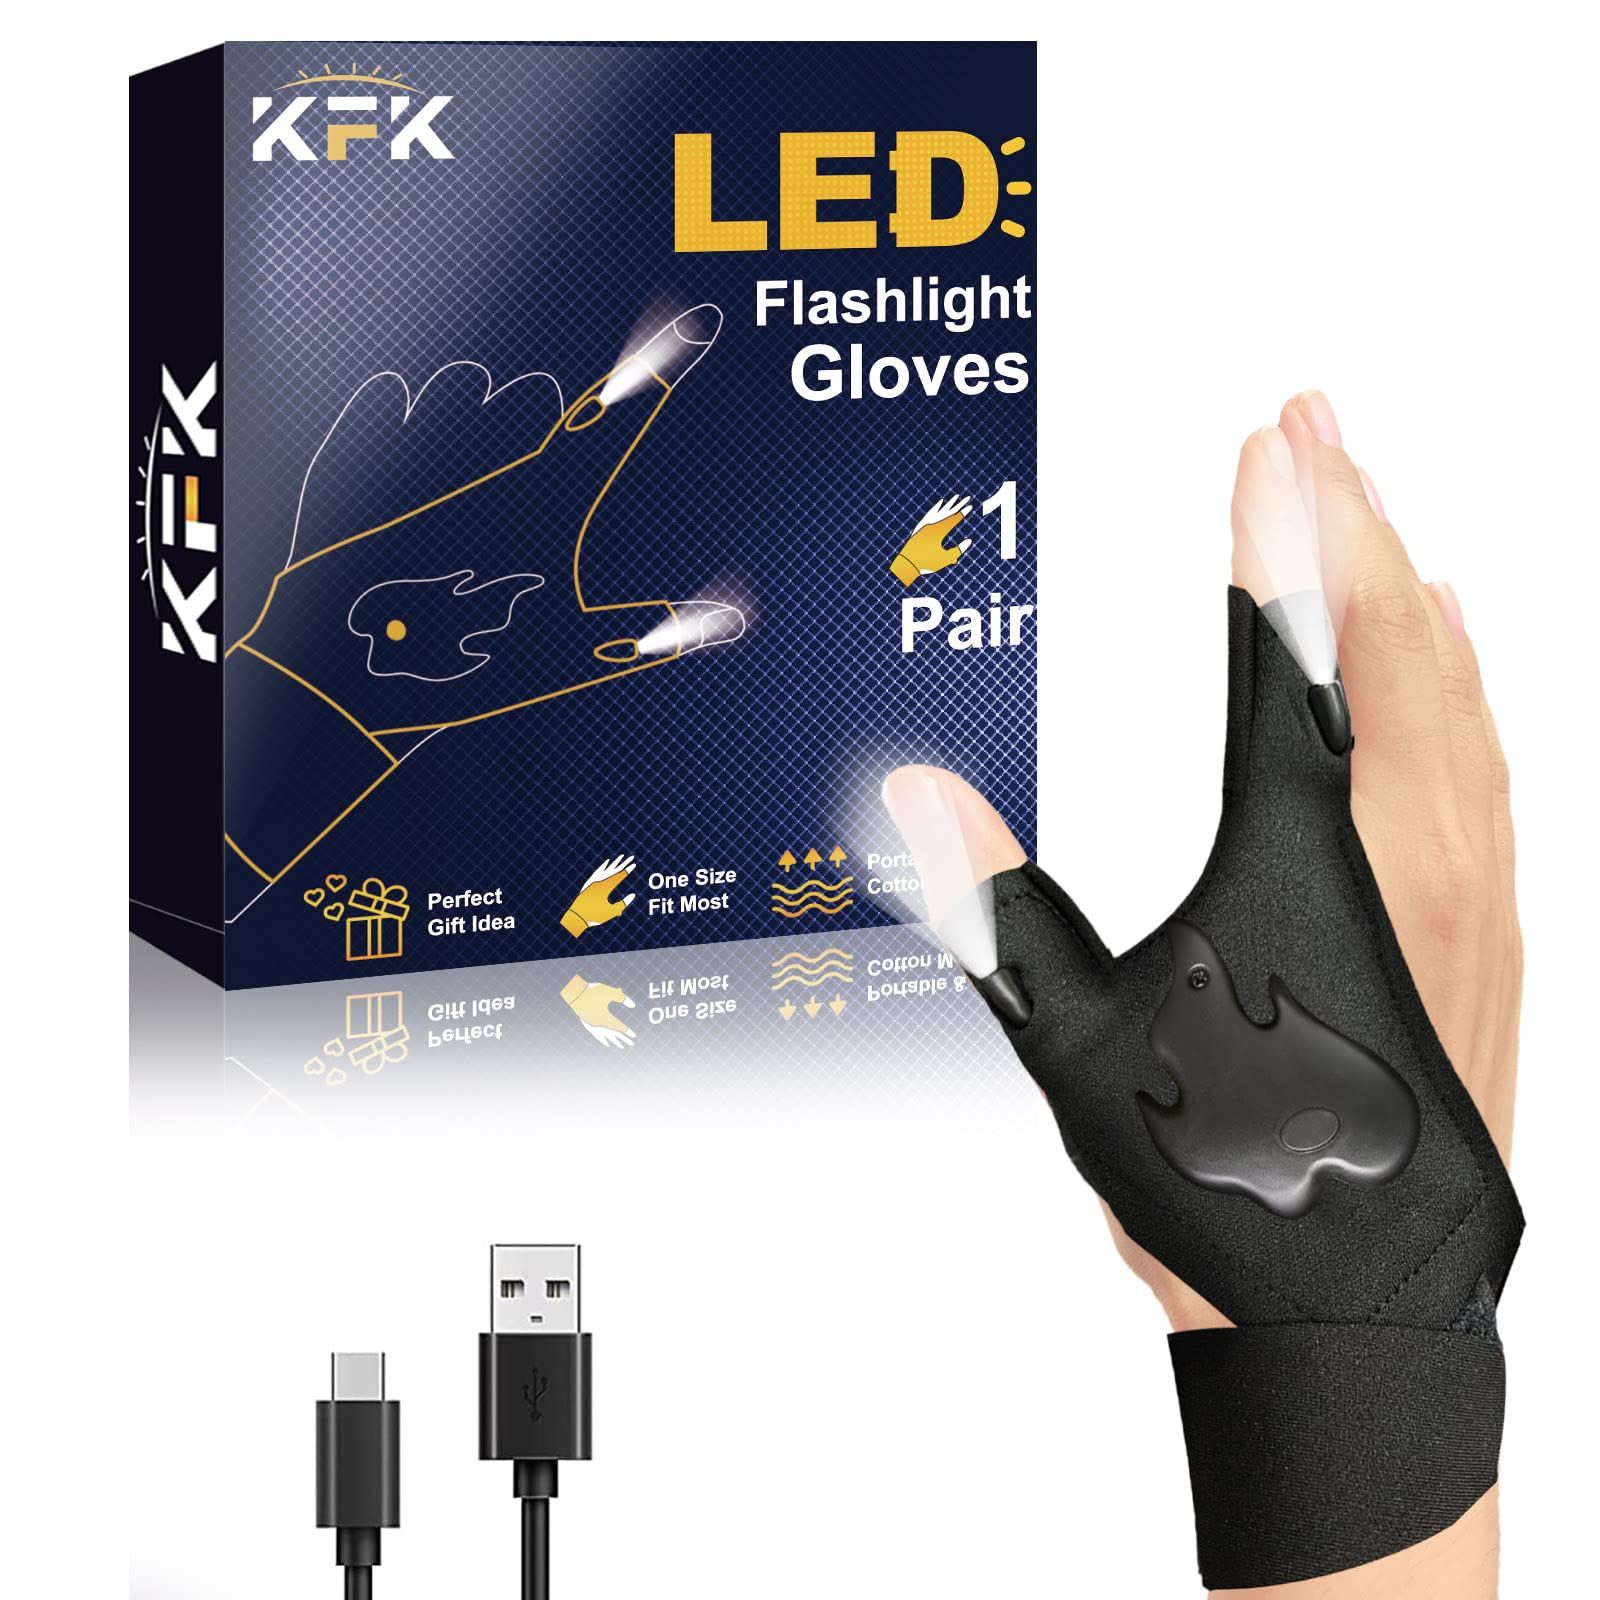 KFK Stocking Stuffers for Men LED Flashlight Gloves Gifts for Men, Gloves with Lights Rechargeable,  | Amazon (US)